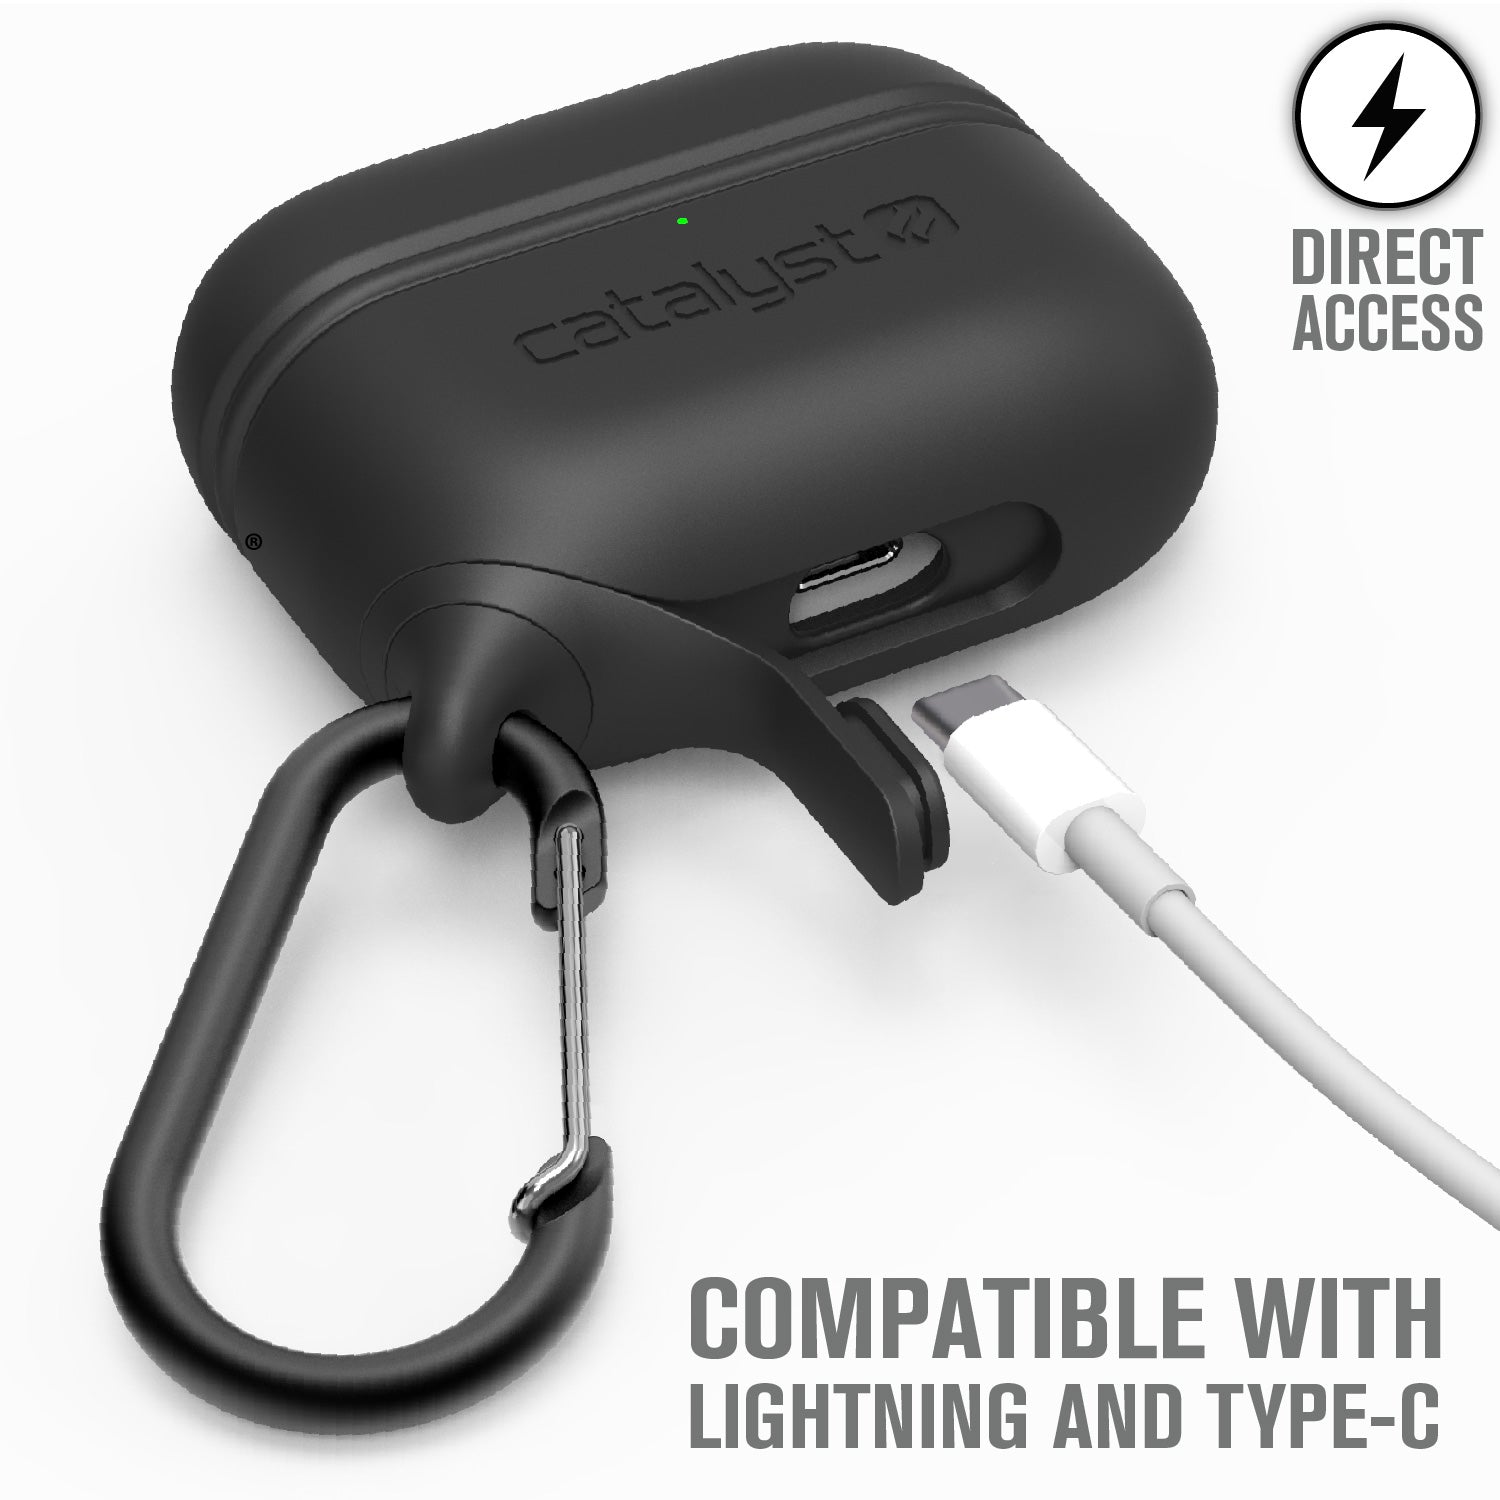 CATAPLAPDPROBLK | catalyst airpods pro gen 2 1 waterproof case carabiner special edition black open charging plug with type c cable text reads direct access compatible with lightning and type c